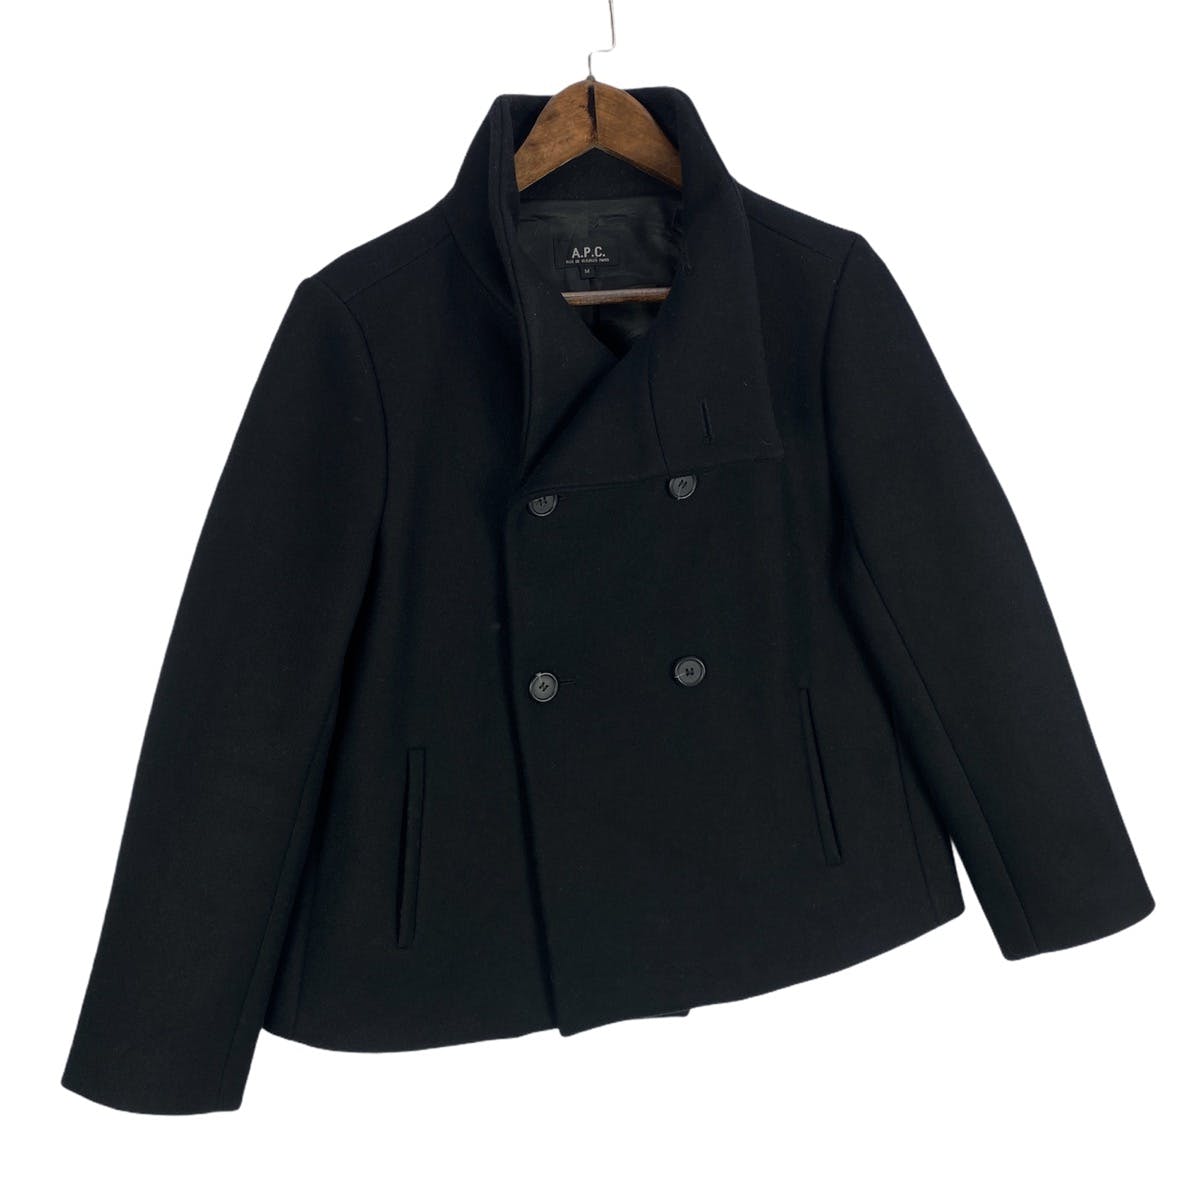 A.P.C Peacoat Wool Cropped Jacket Made In Poland - 4